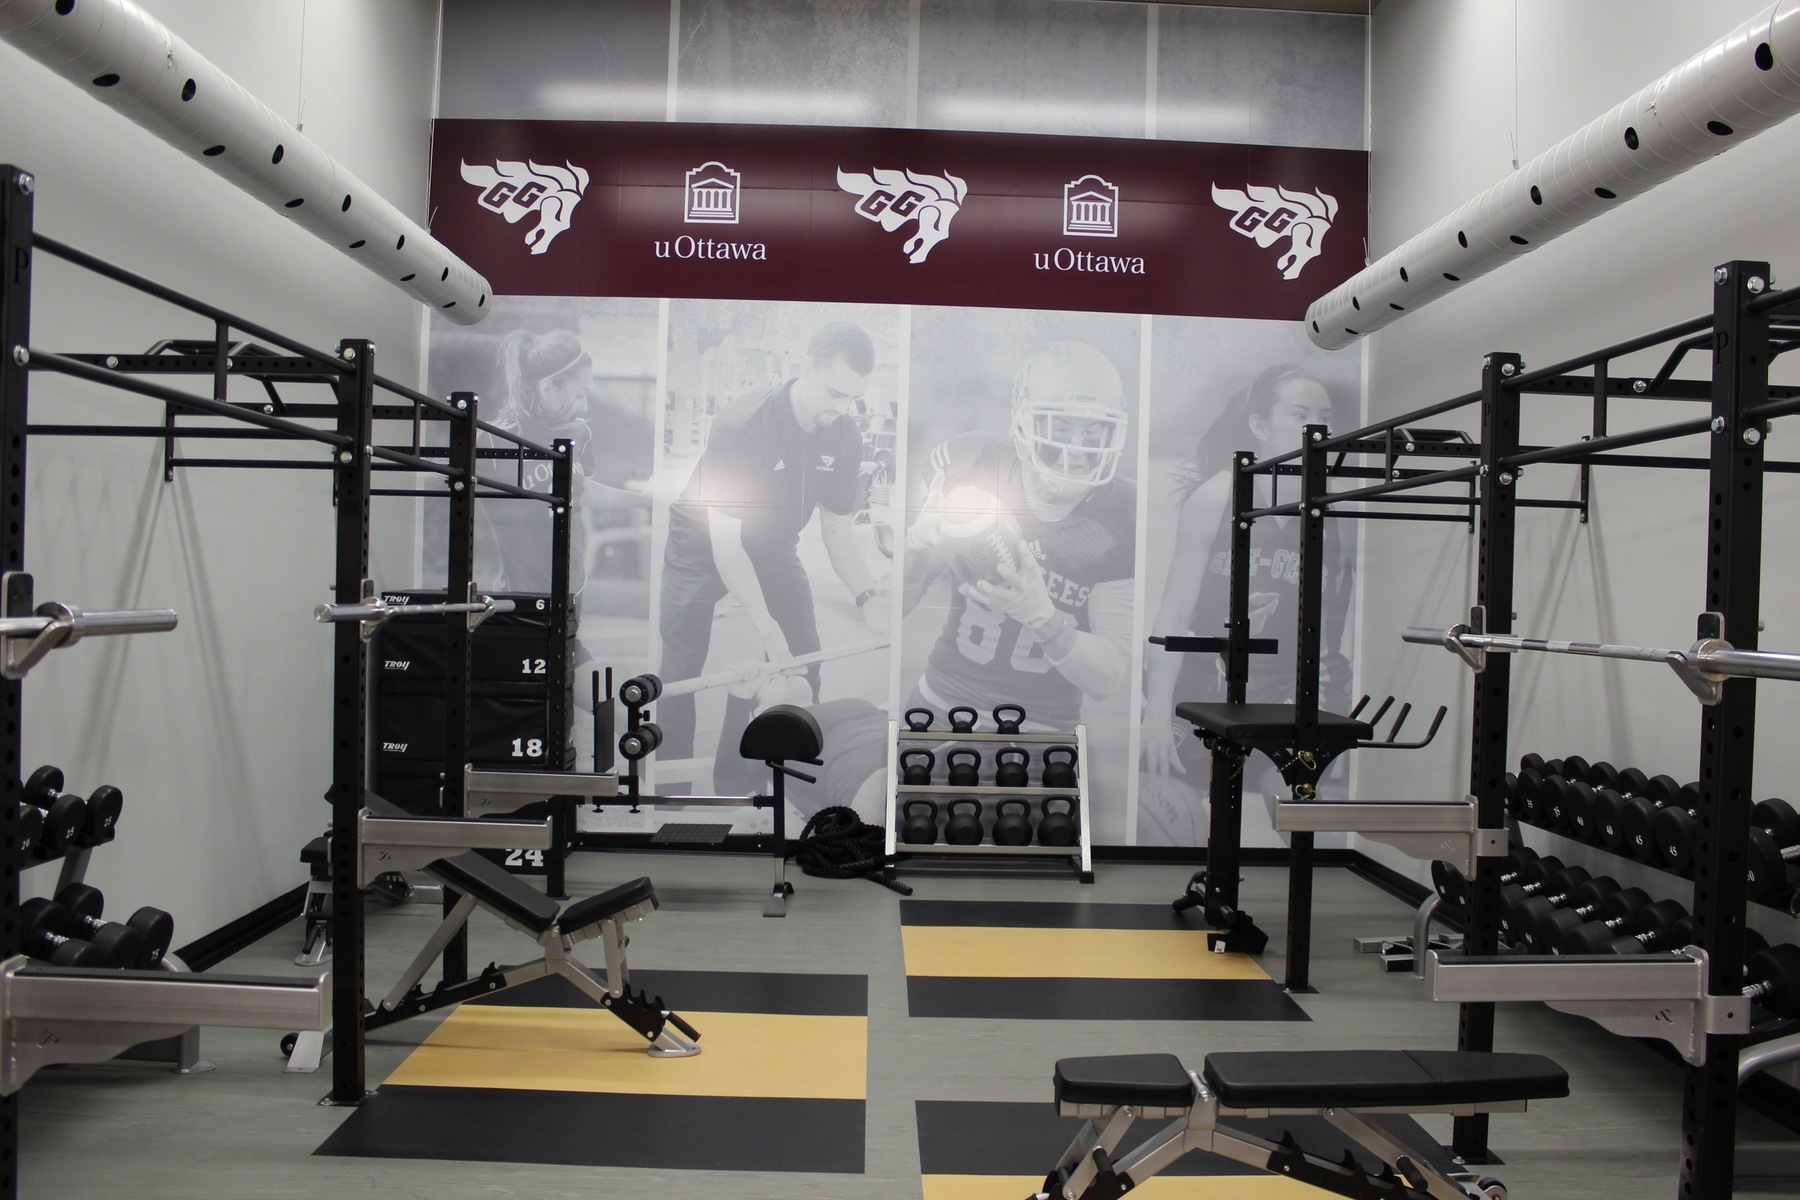 A view inside another room in the high performance centre with different equipment.